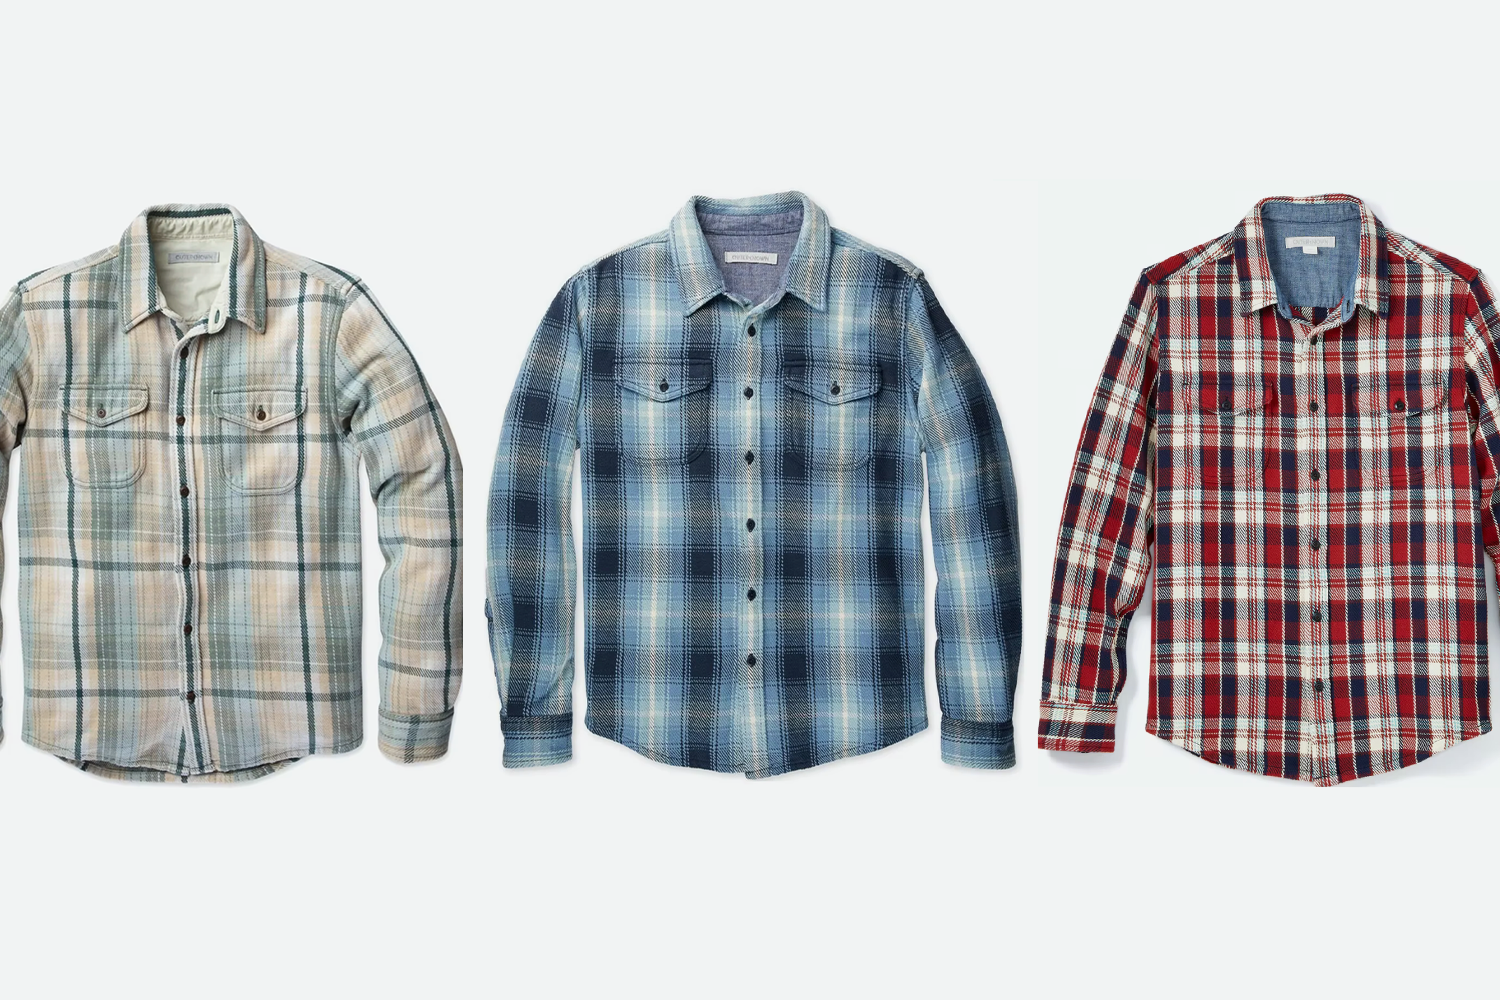 Deal: Outerknown's Famed Blanket Shirt Is 30% Off Today 